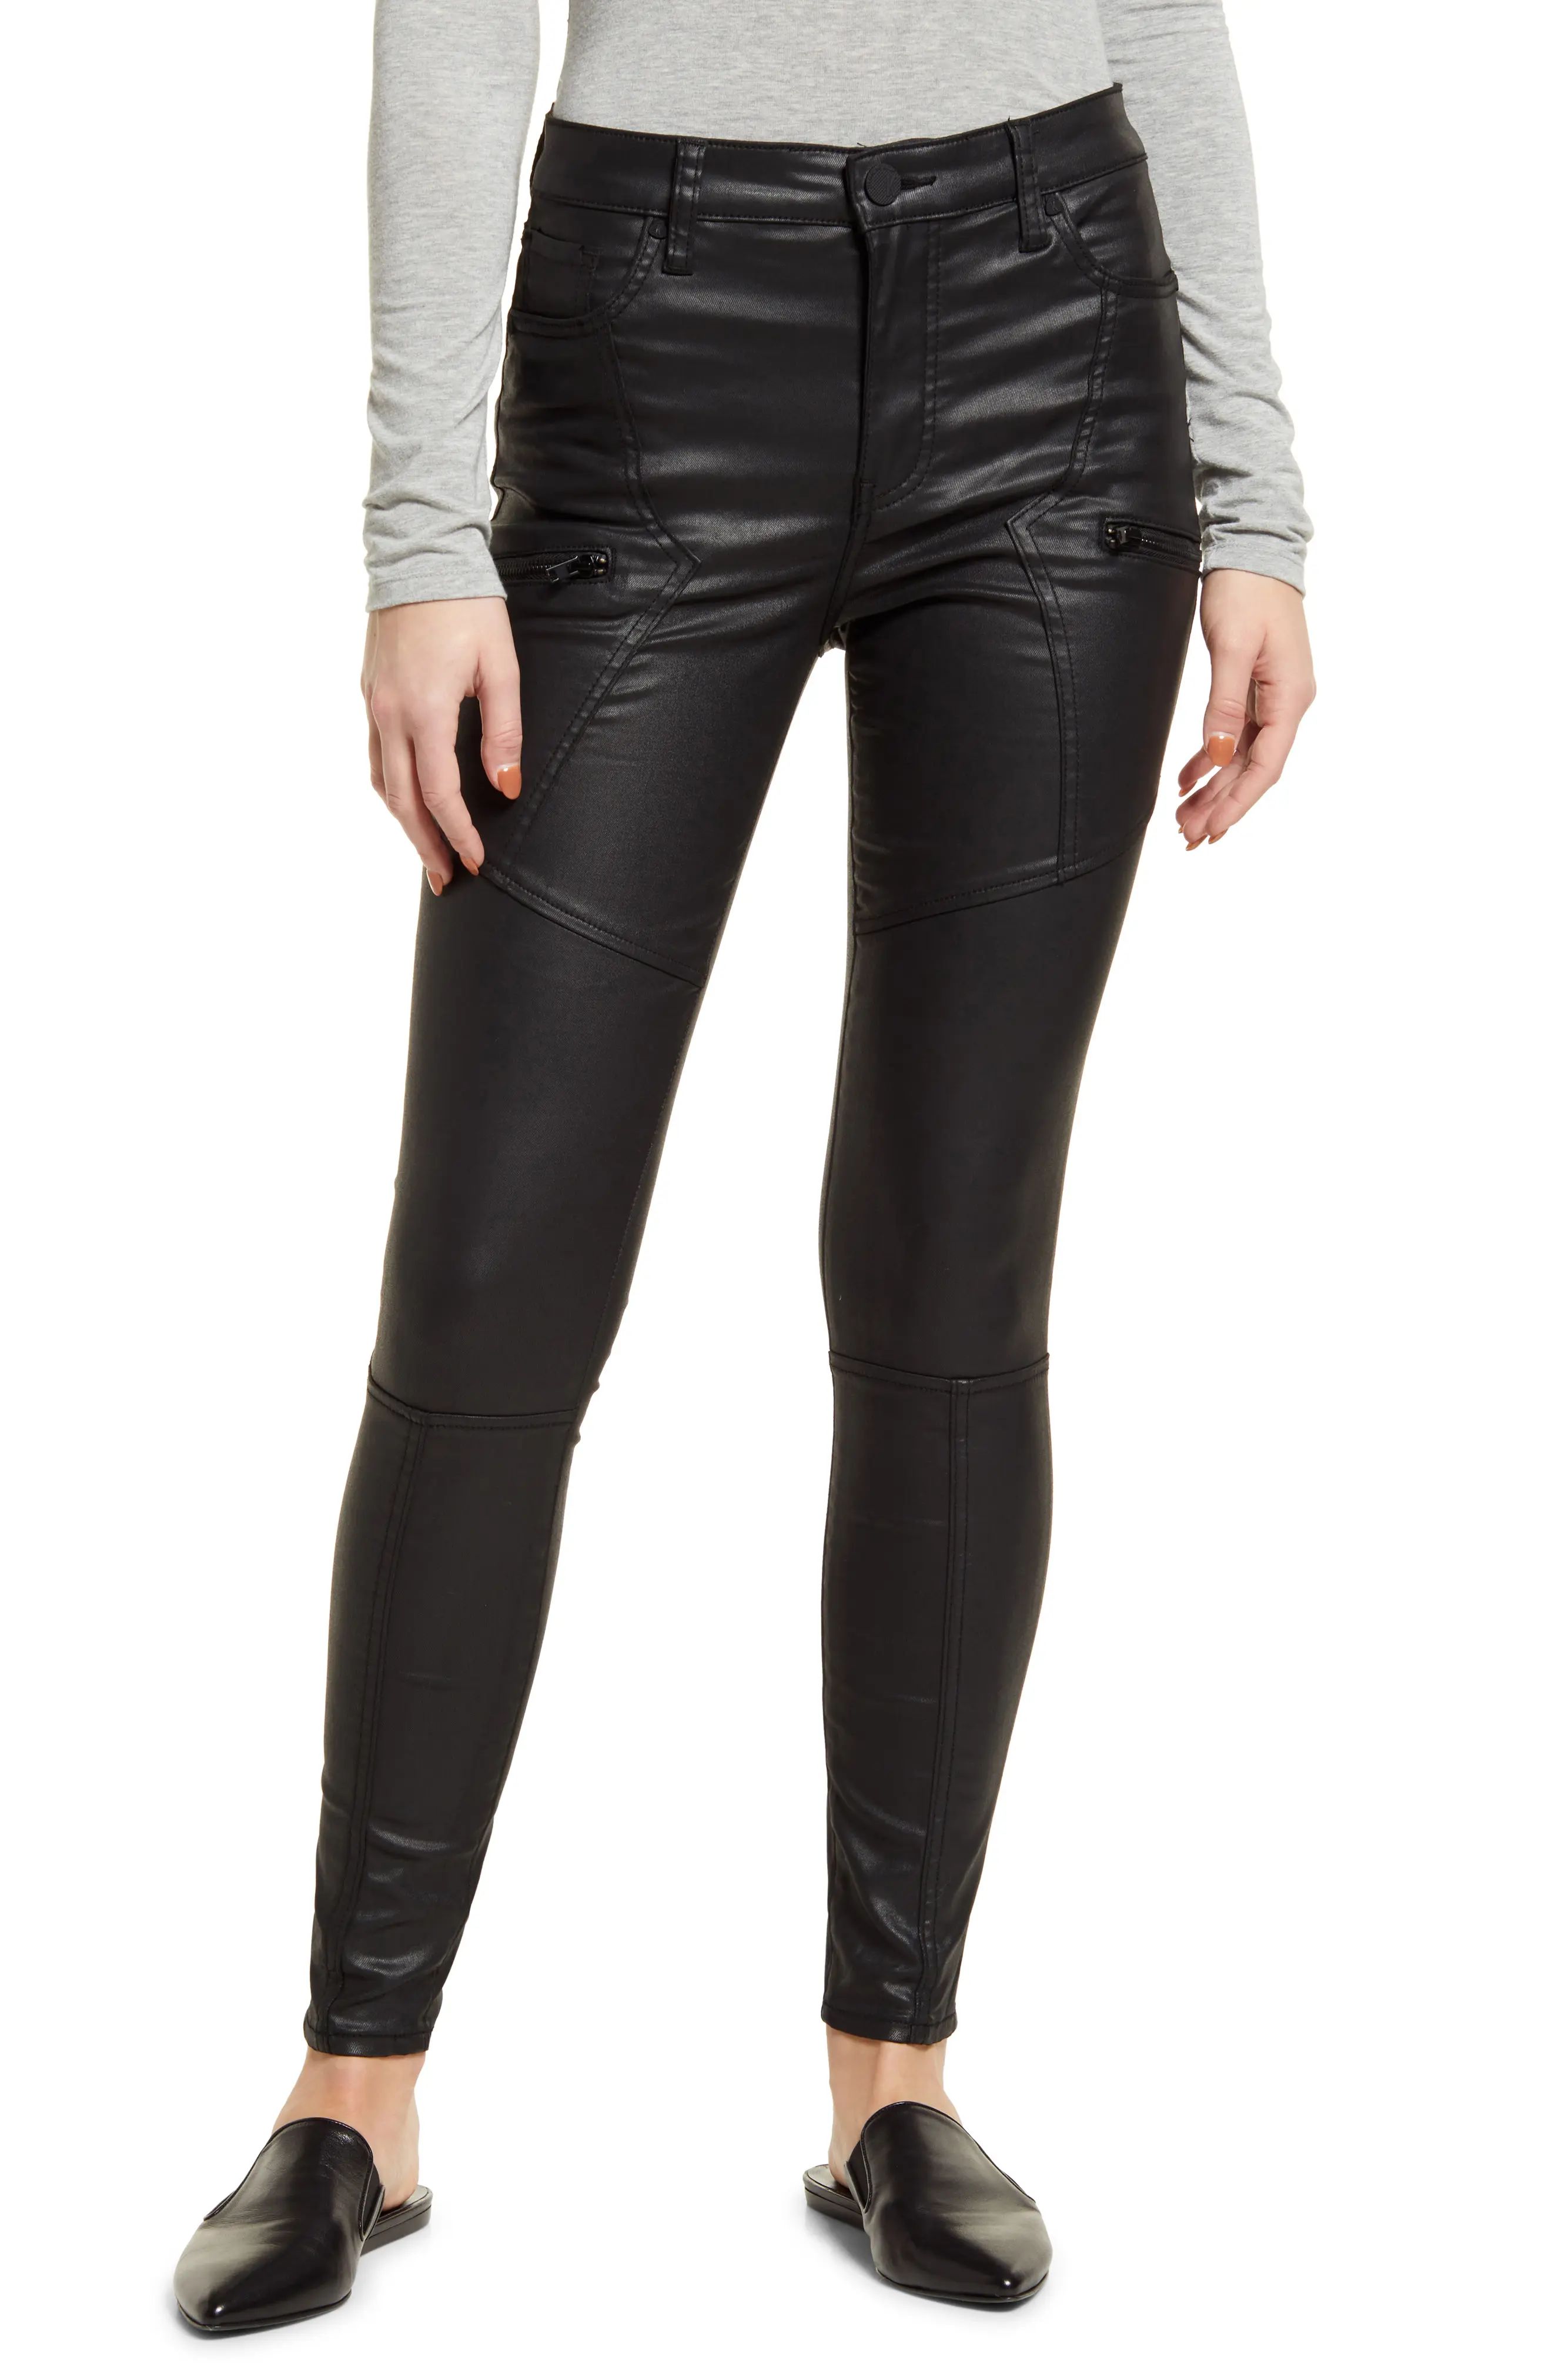 KUT from the Kloth Mia Moto Coated Toothpick Skinny Pants in Black at Nordstrom, Size 4 | Nordstrom